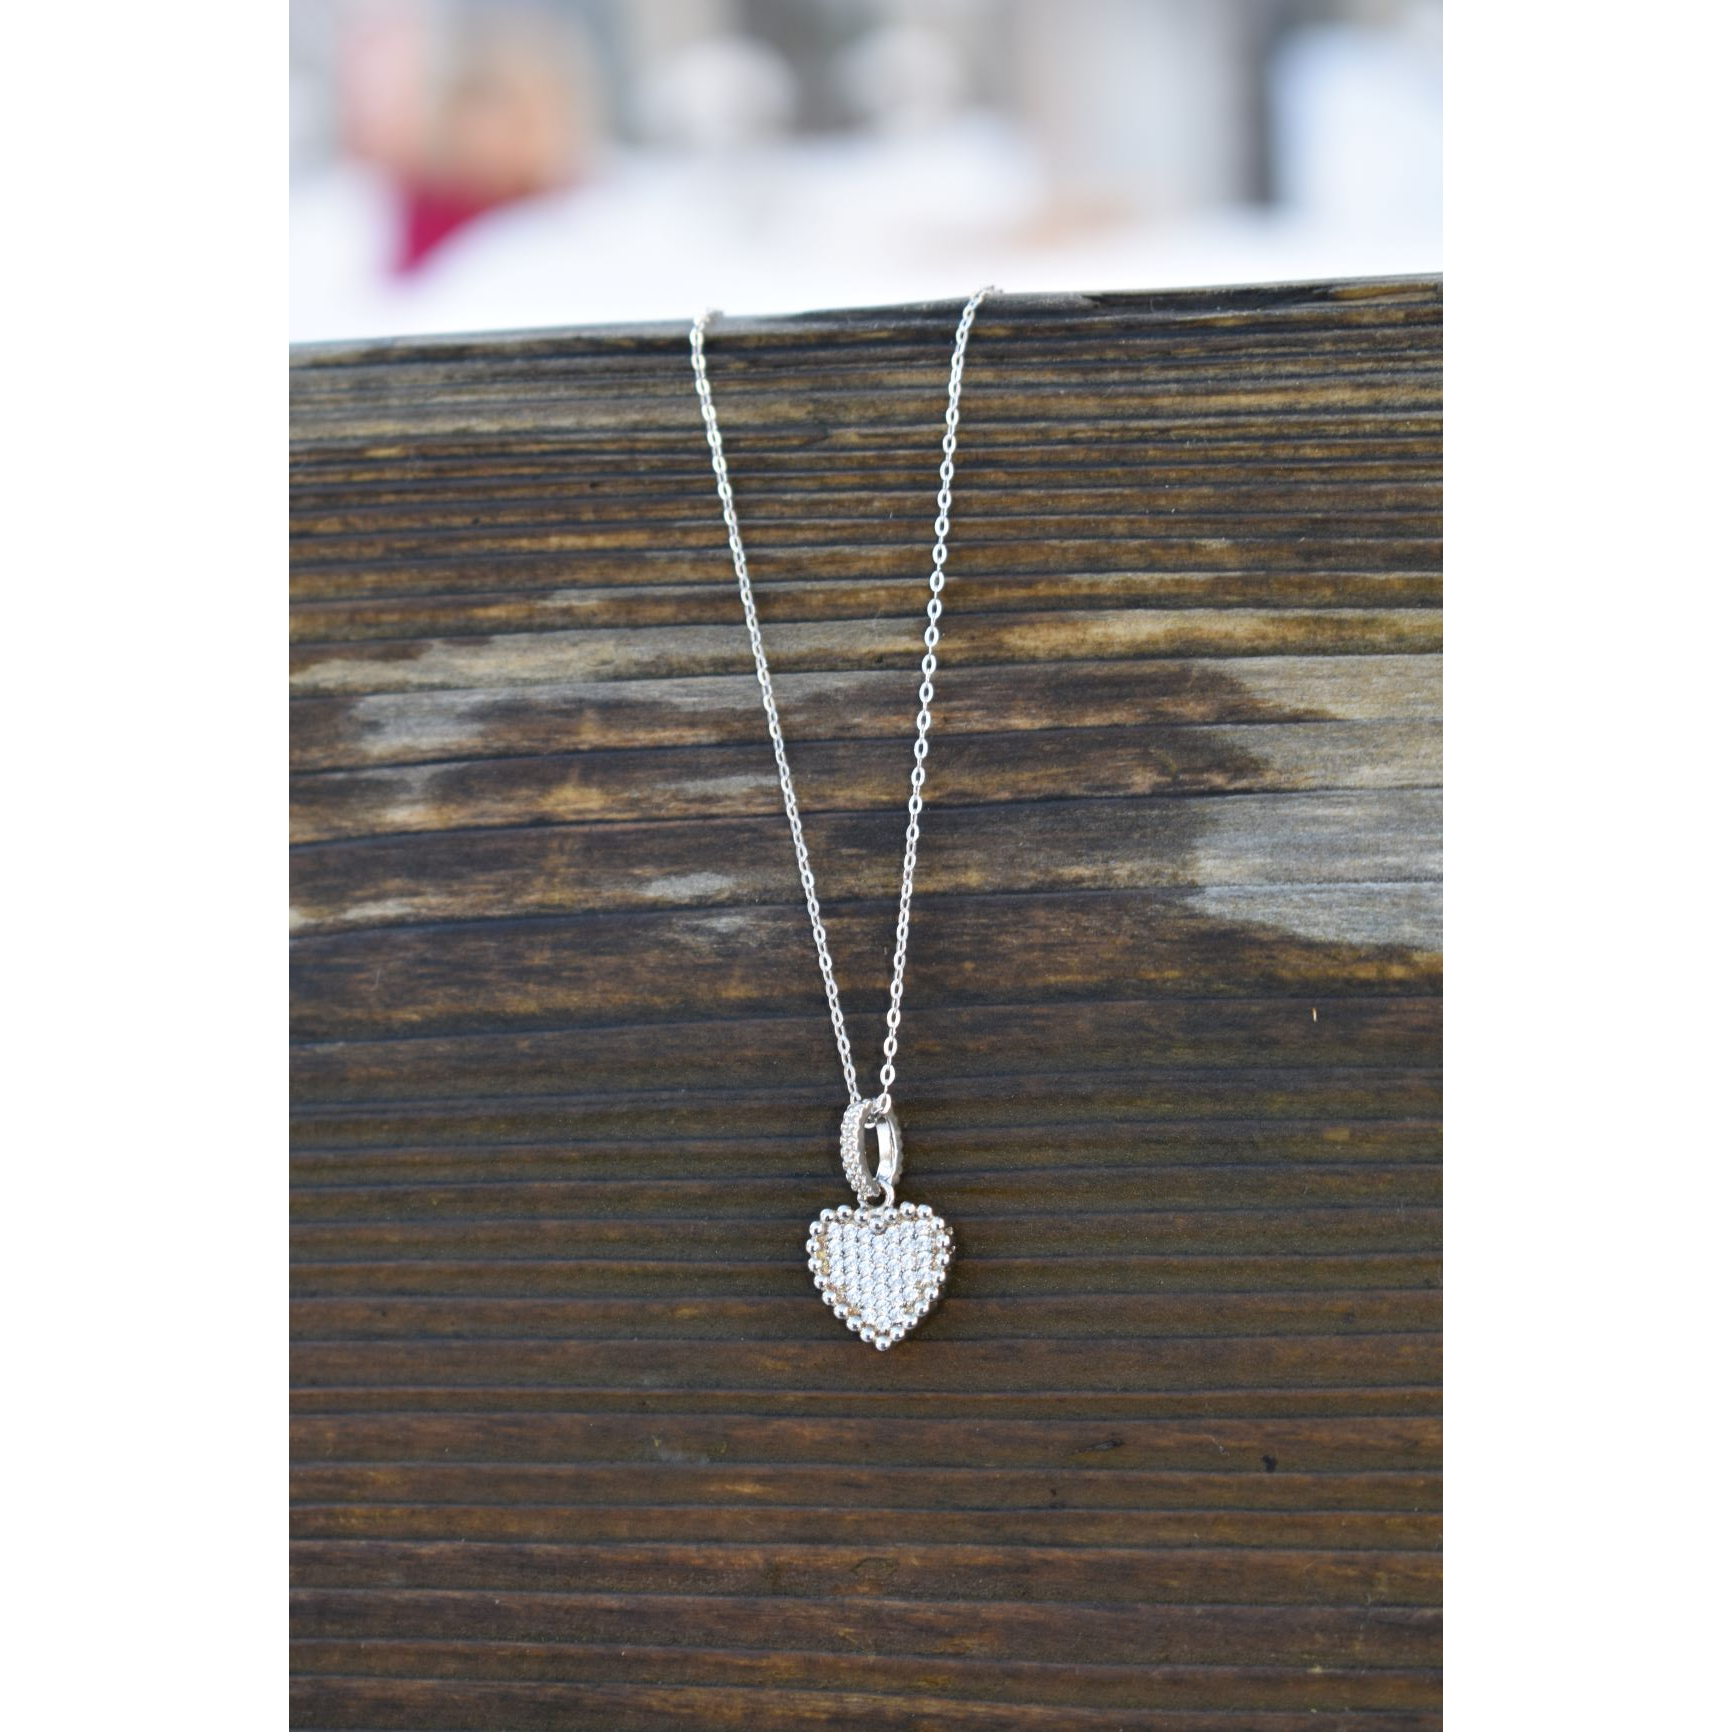 Heart Pendant and chain Express your Love - Nelissima Jewelry